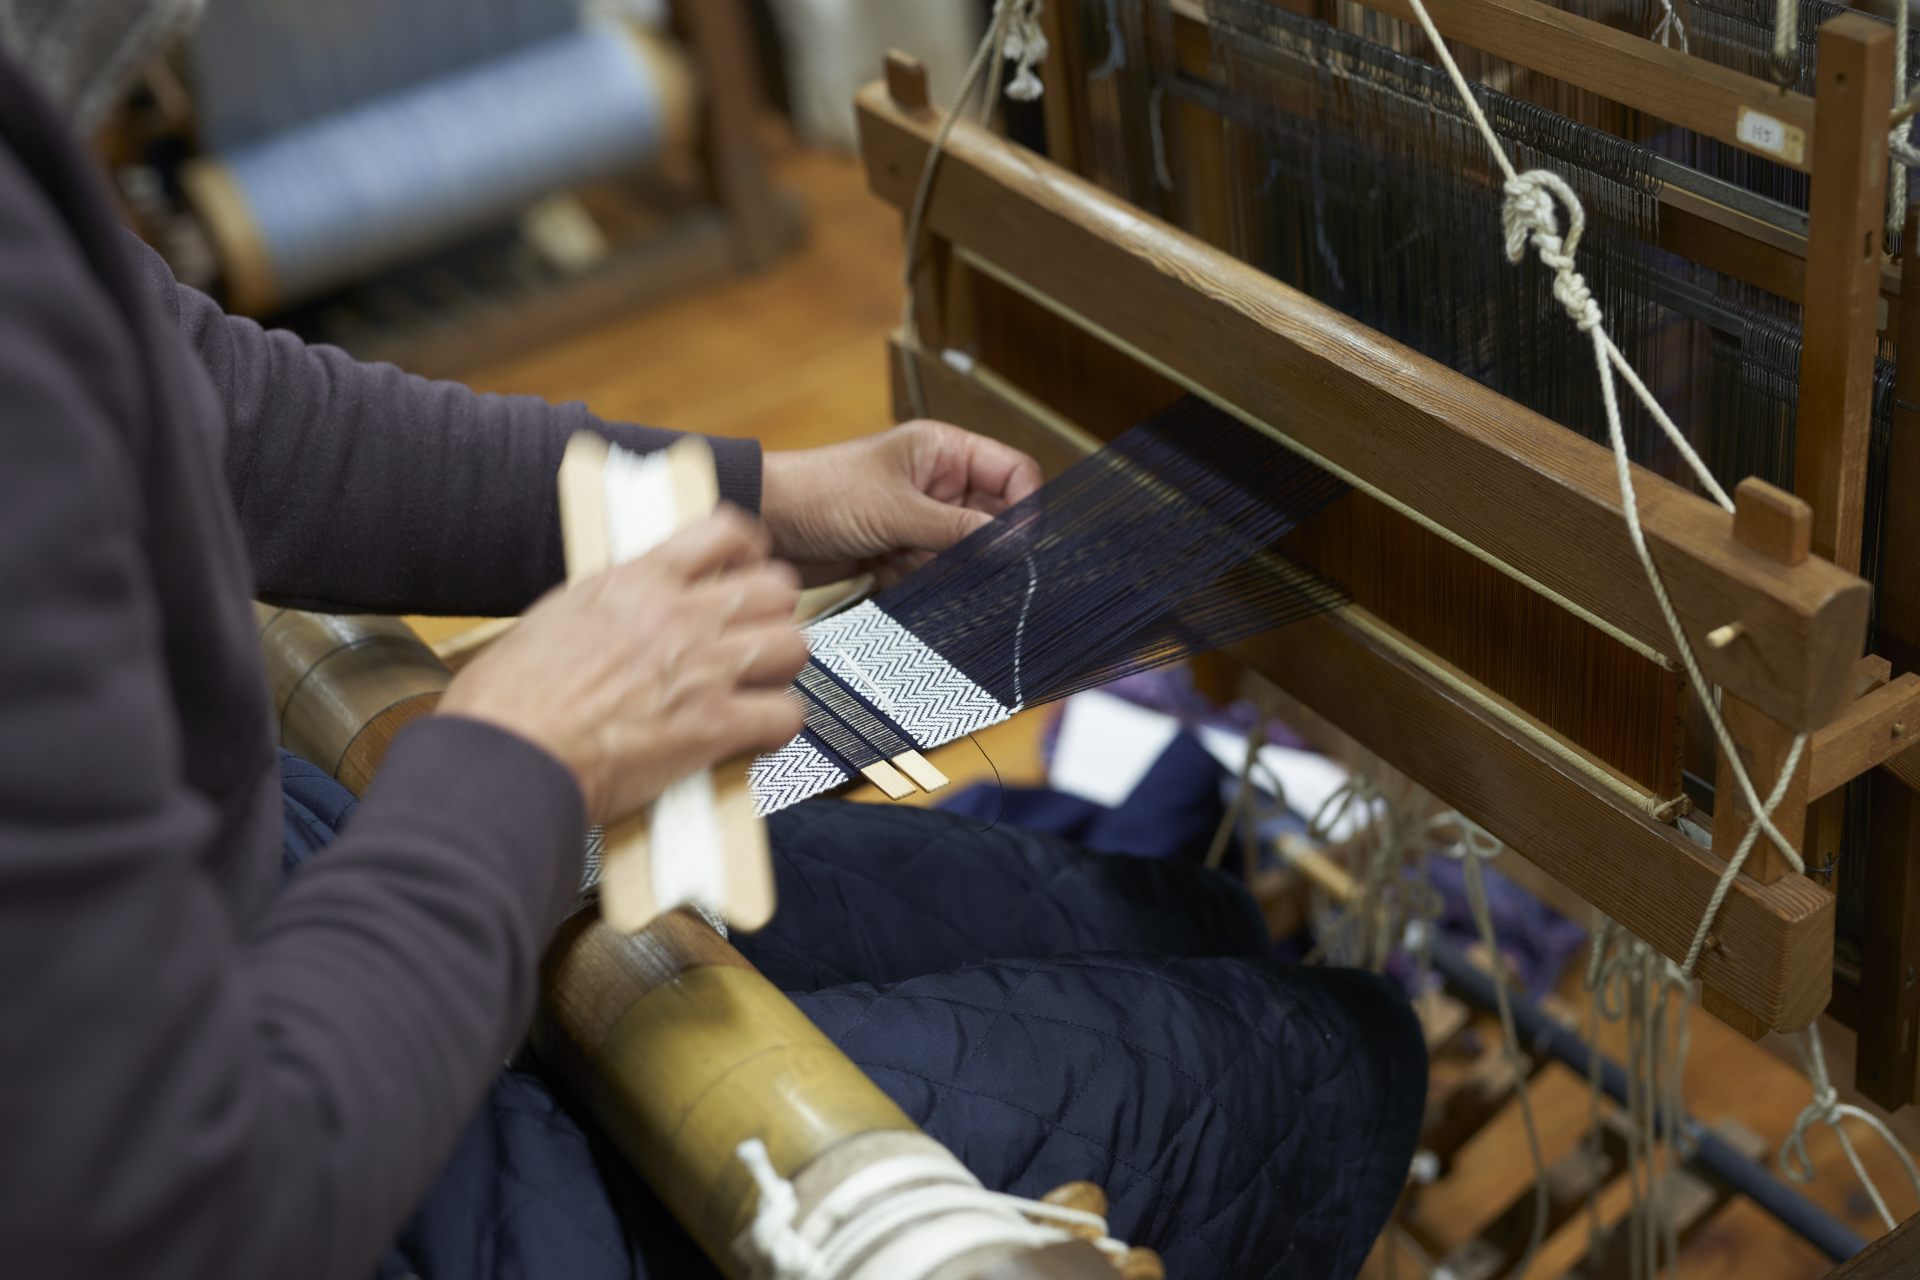 Warp and weft threads are carefully woven, creating an intentional pattern.